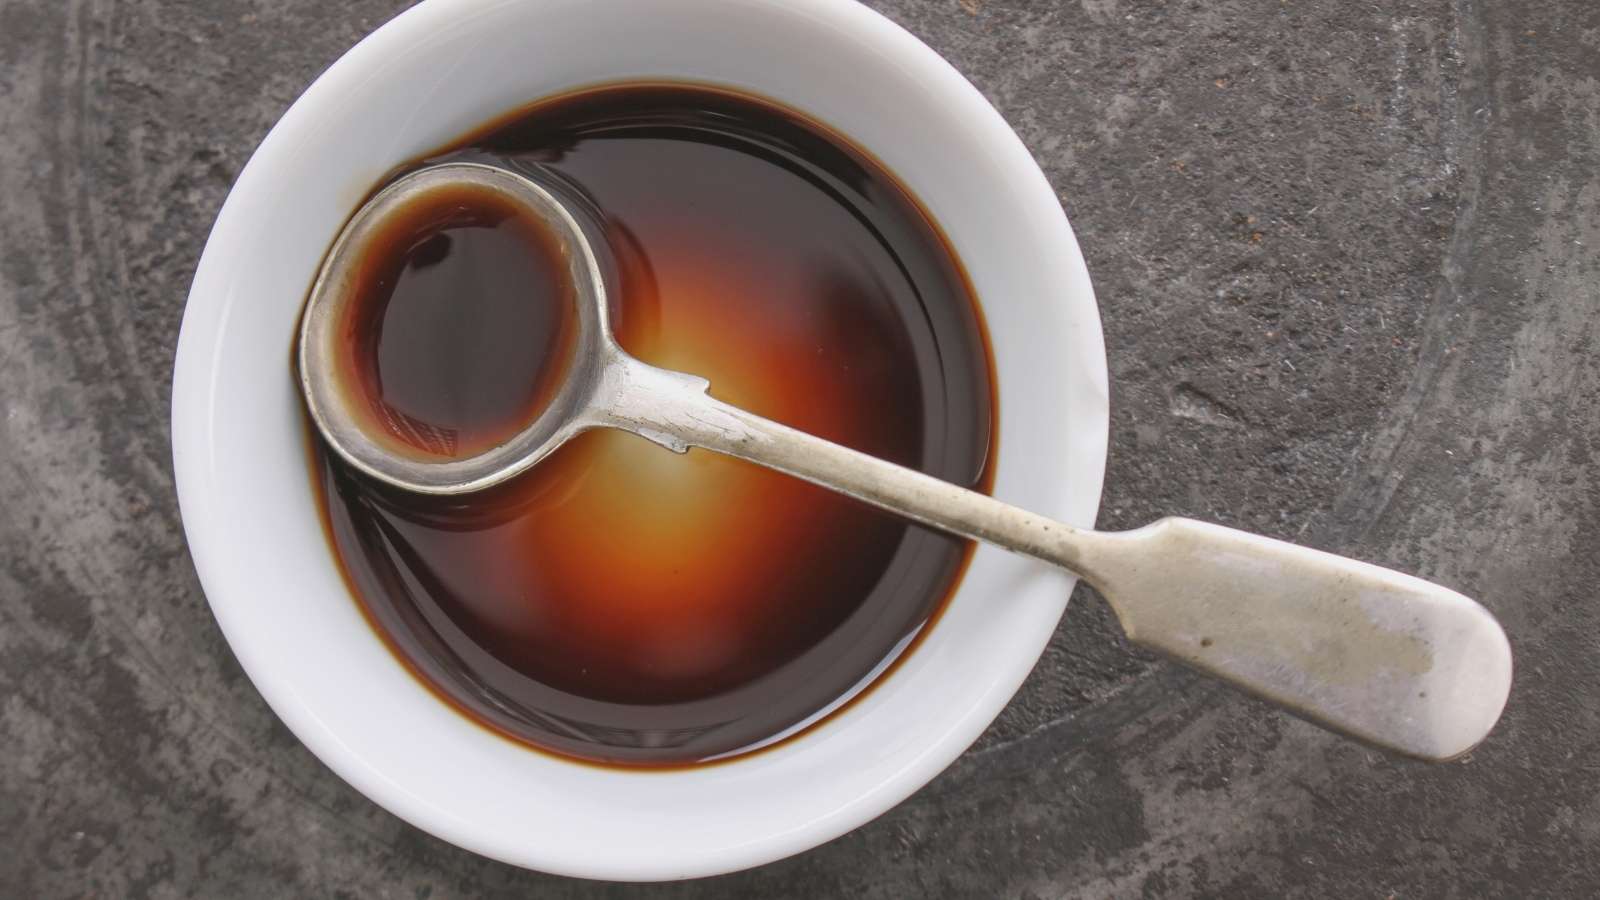 Global Worcestershire Sauce Market Is Estimated To Witness High Growth Owing To Increasing Preference for Flavored Food and Growing Demand for Ready-to-Use Sauces